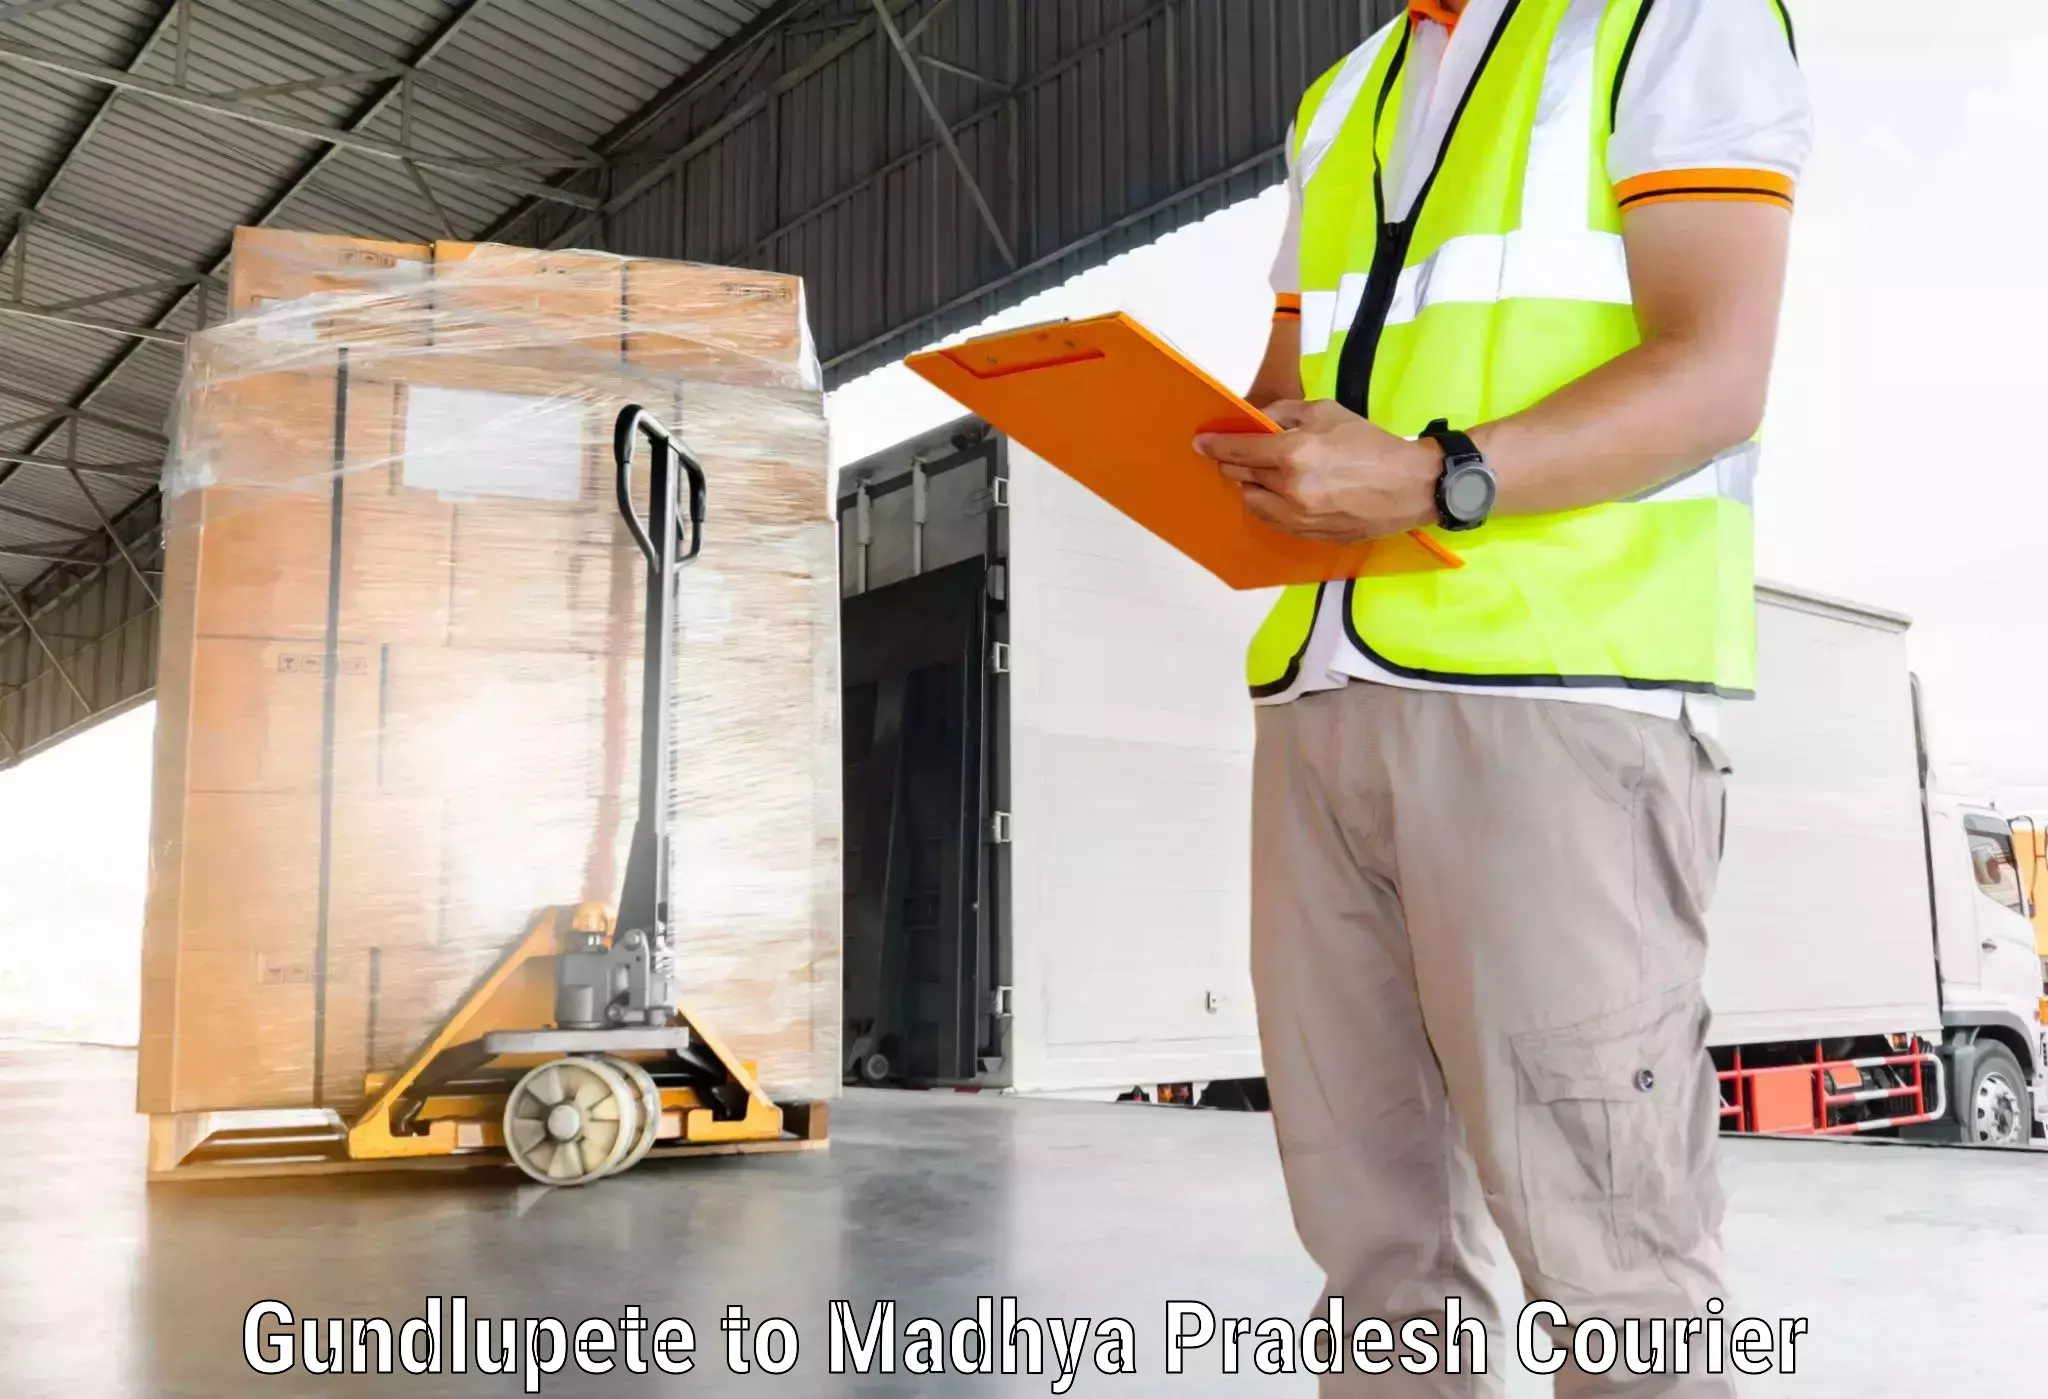 Reliable courier services Gundlupete to Nainpur